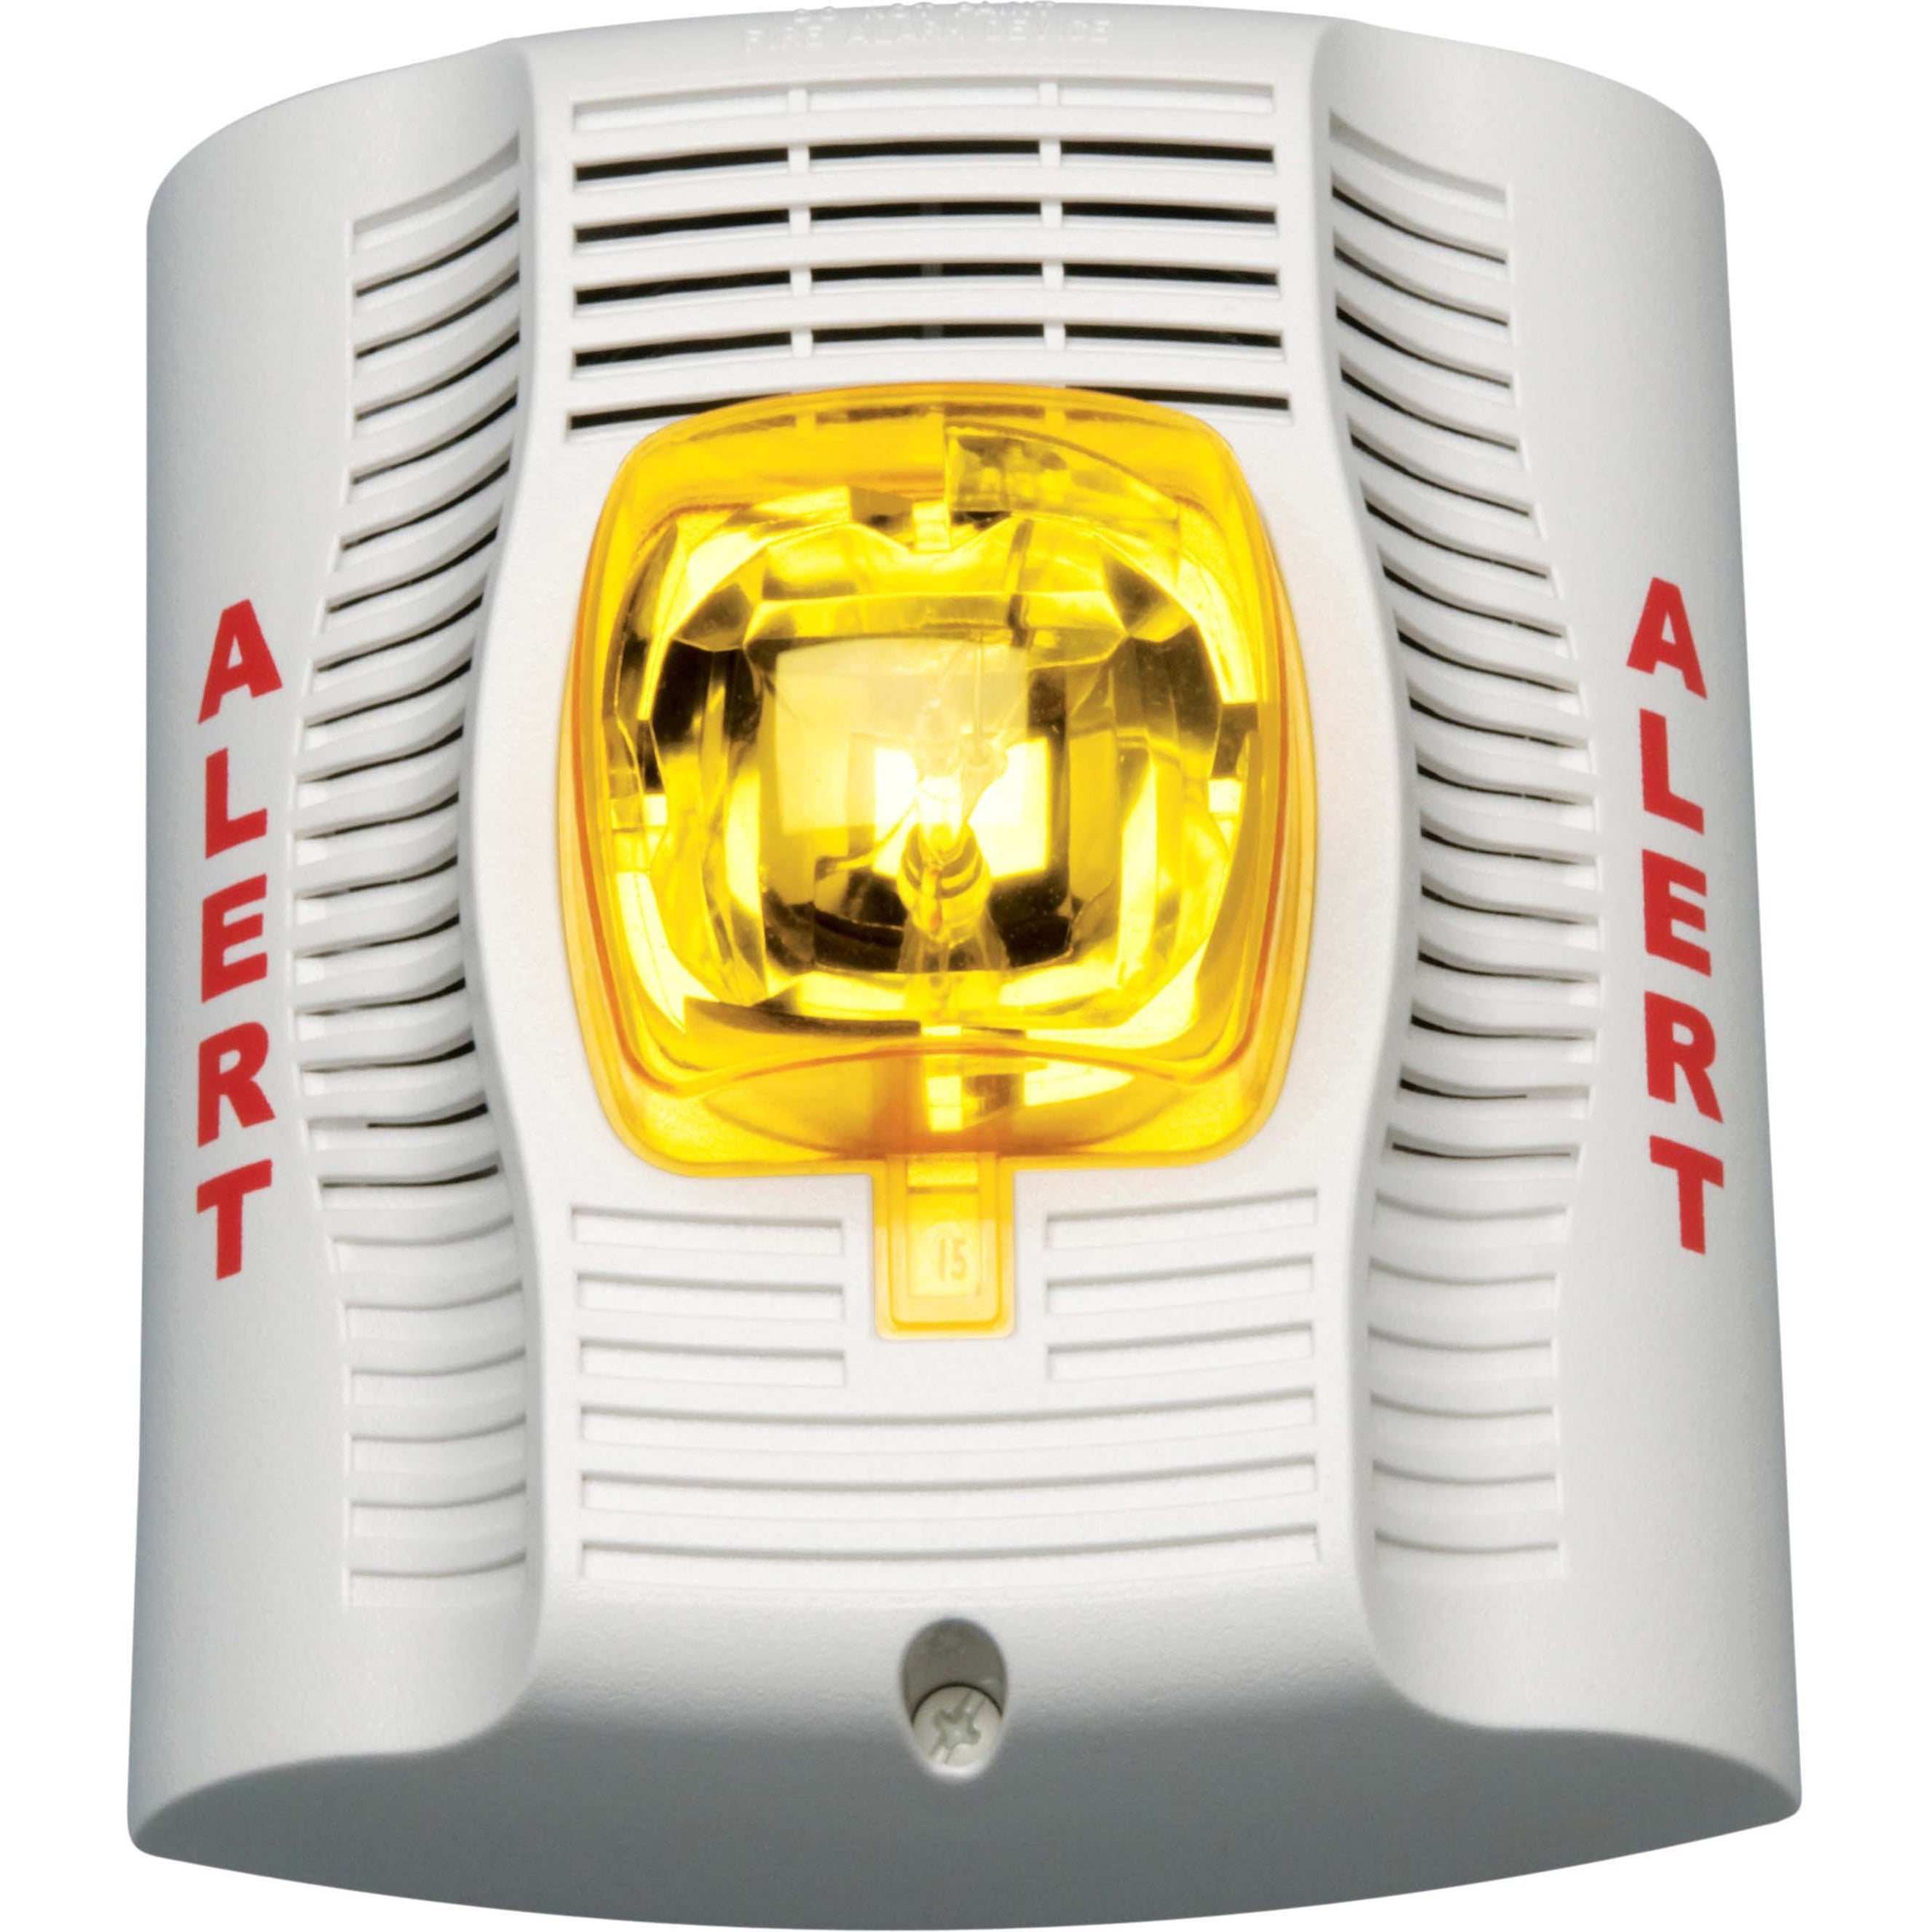 SpectrAlert Advance SWH Security Strobe Light 783863028120 NEW SHIPS TODAY 